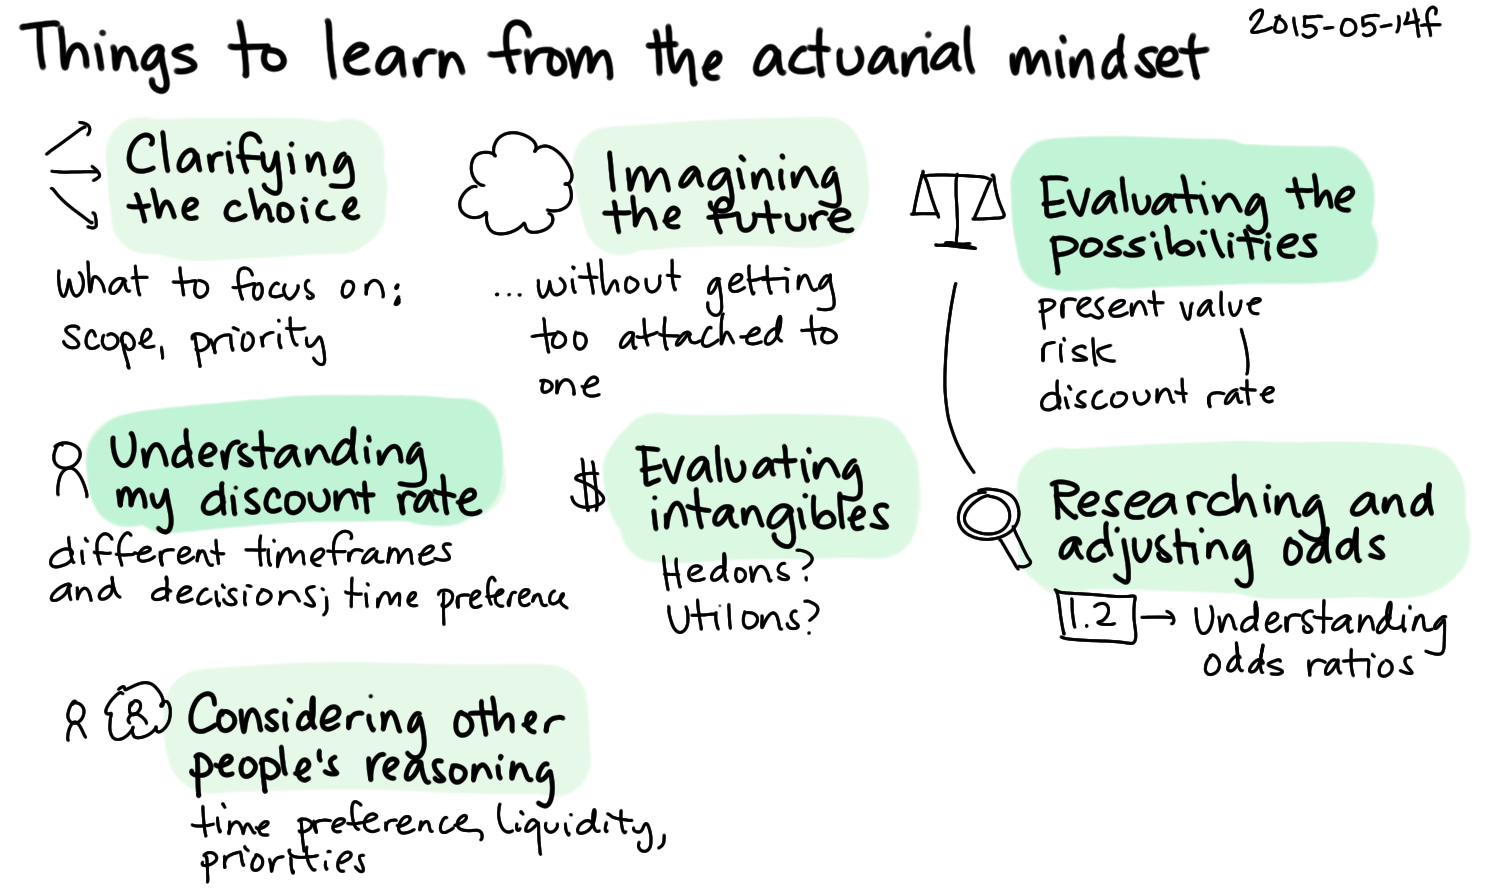 2015-05-14f Things to learn from the actuarial mindset -- index card #quantified #decision-making #mindset.png